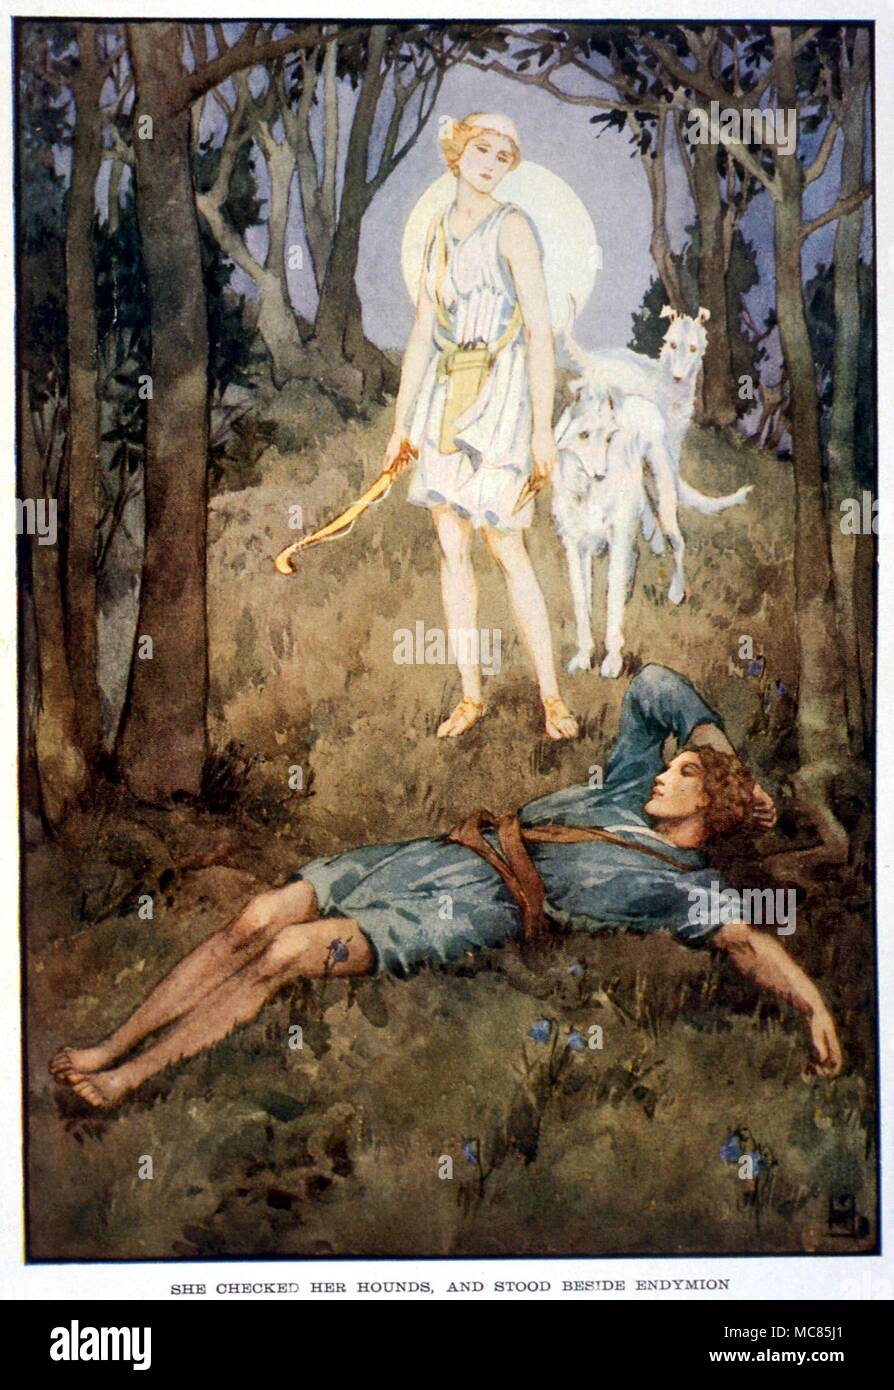 Greek Mythology The Moon Goddess Diana Falling In Love With The Sleeping Shepherd Endymion Illustration By Helen Stratton 1915 For A Book Of Myths Stock Photo Alamy